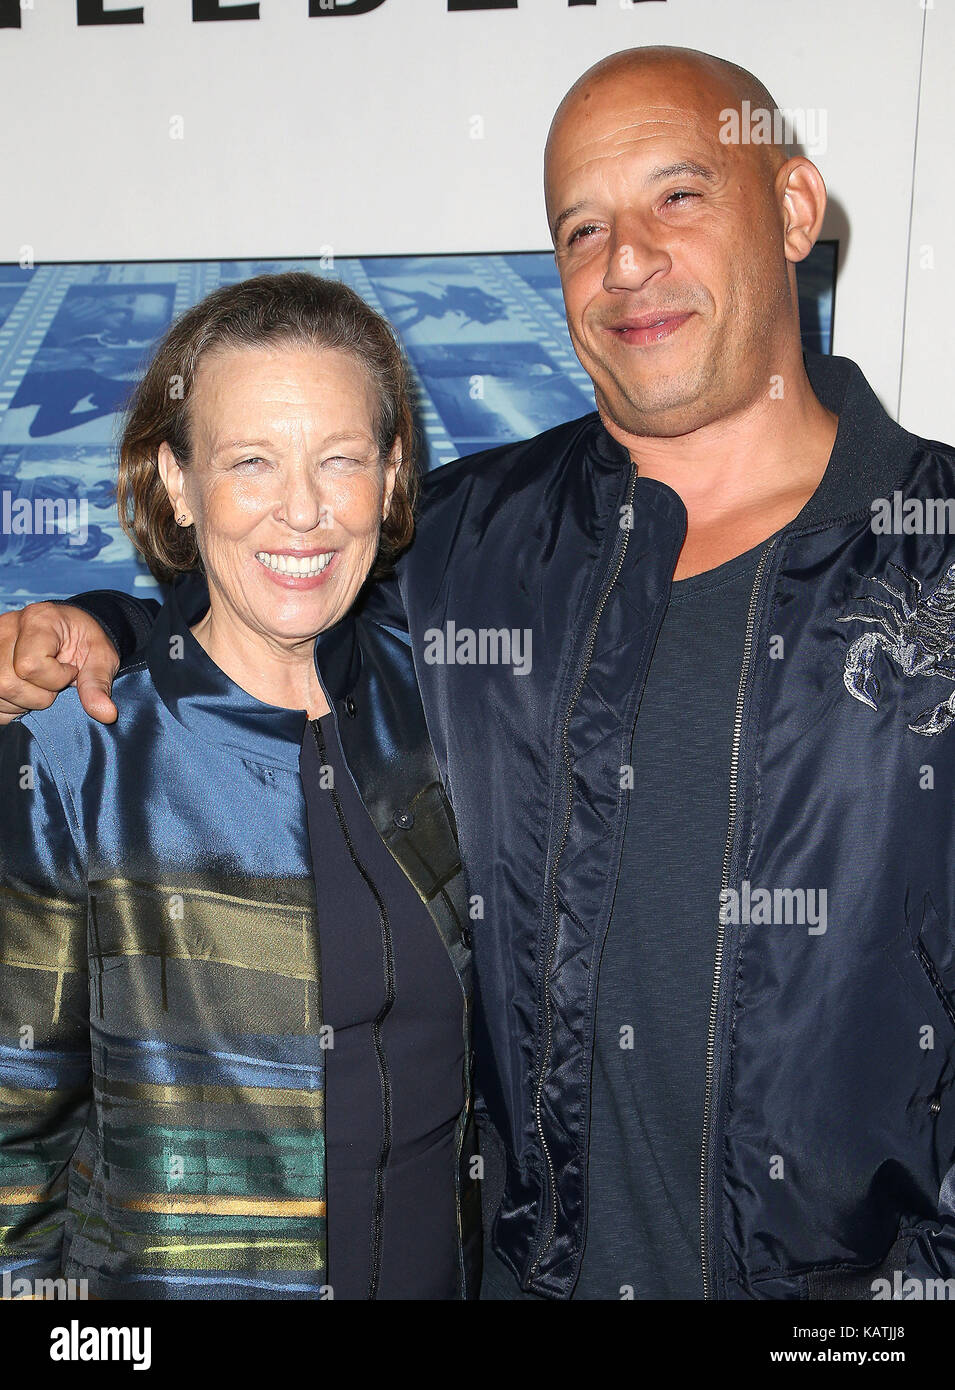 Hollywood, California, USA. 26th Sep, 2017. Delora Vincent, Vin Diesel. HBO's Documentary Film SPIELBERG Los Angeles Premiere held at Paramount Studios.Credit: F. Sadou/AdMedia/ZUMA Wire/Alamy Live News Stock Photo